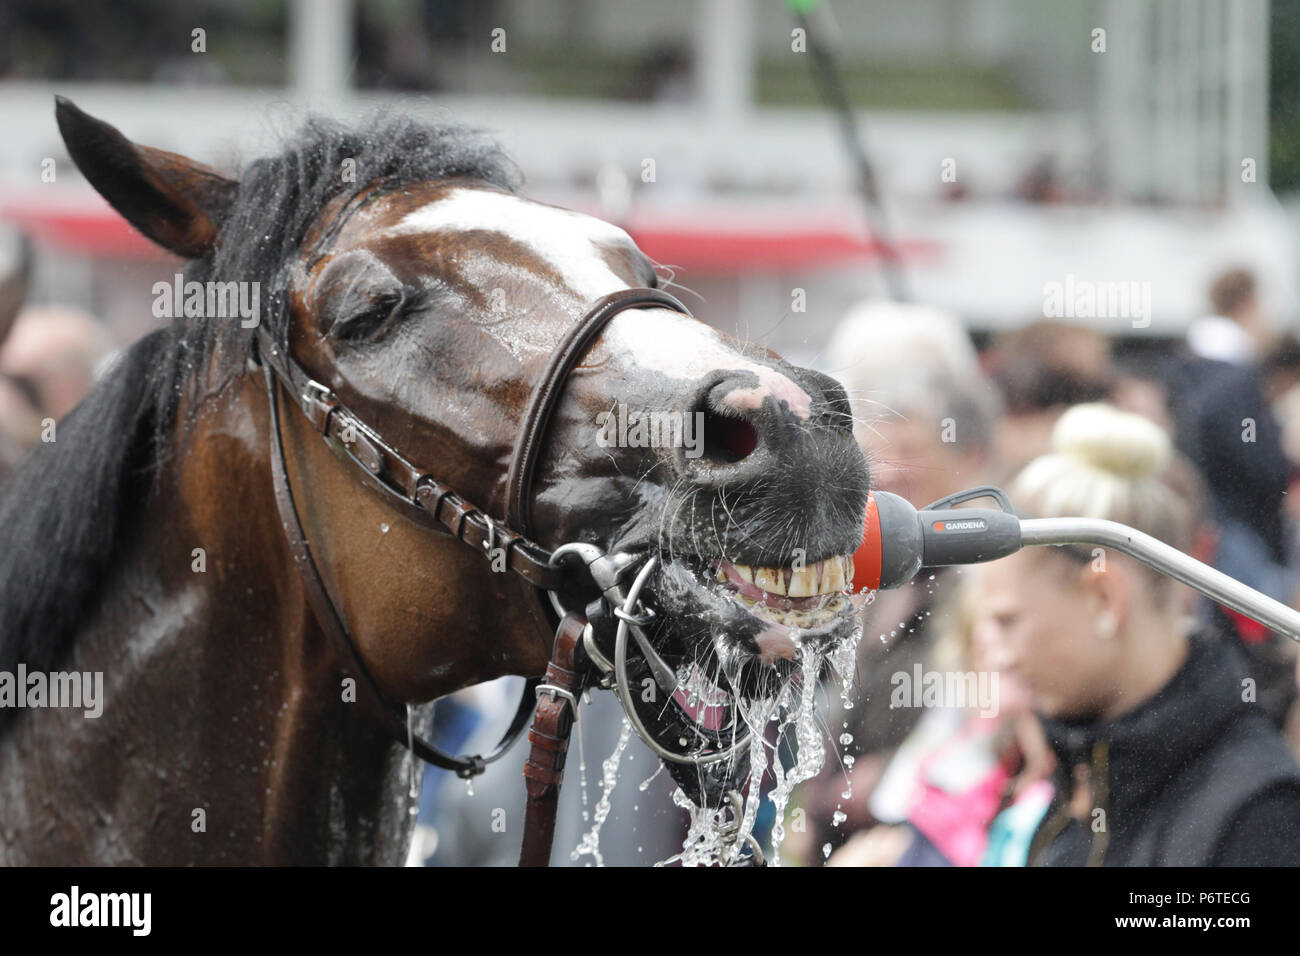 Hamburg, horse gets water from a shower head Stock Photo